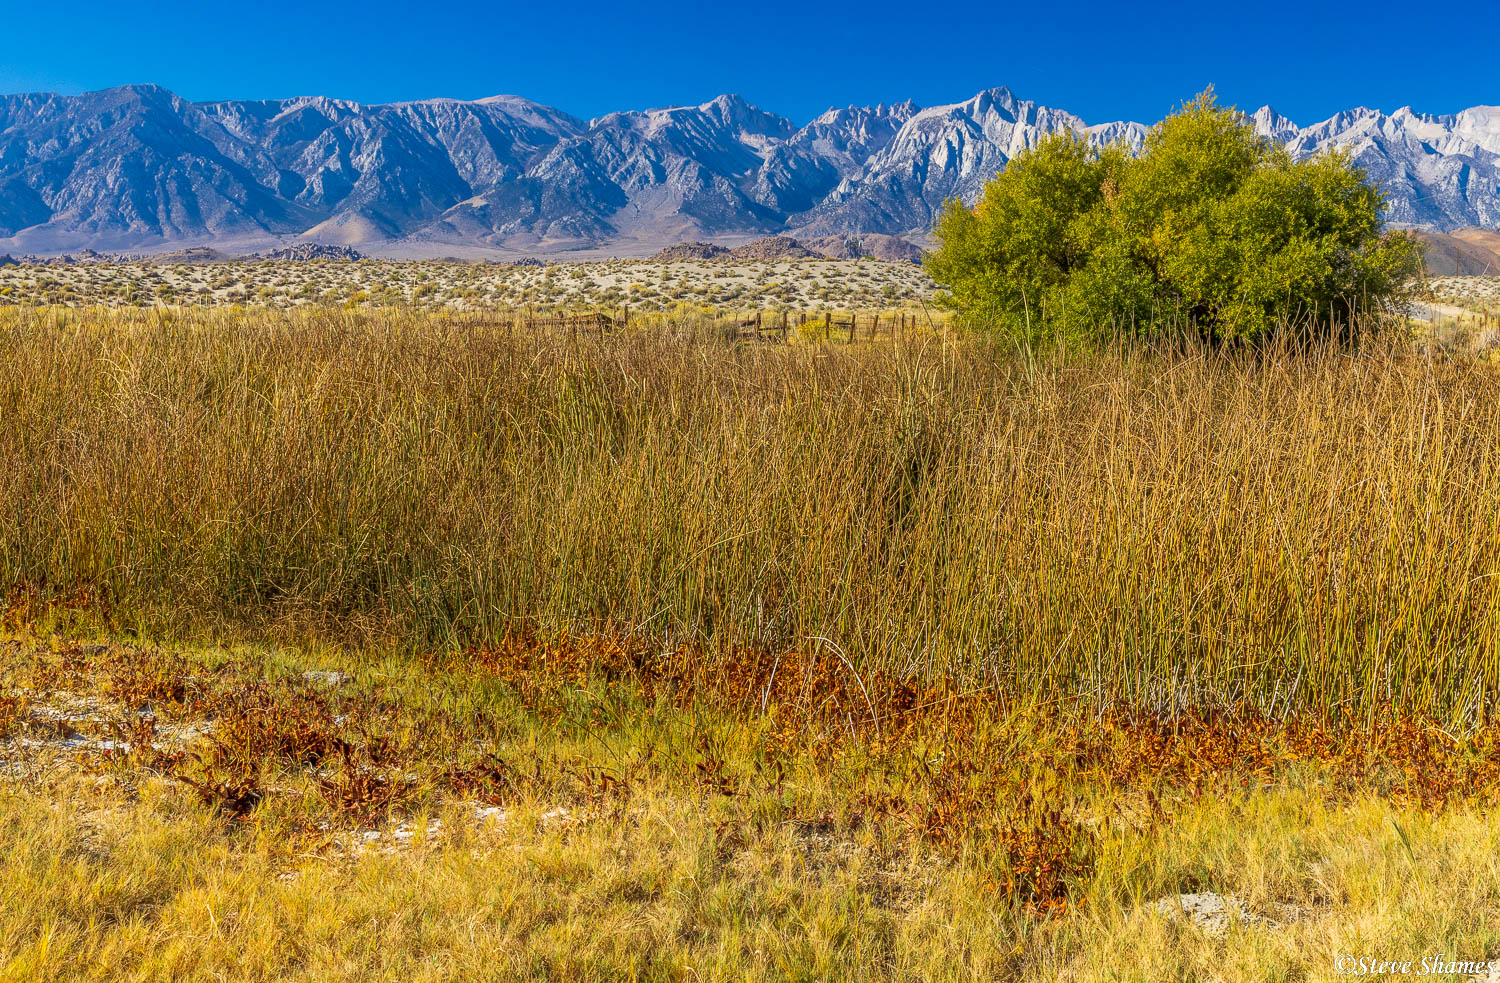 Thickets of reeds along the Owens River.